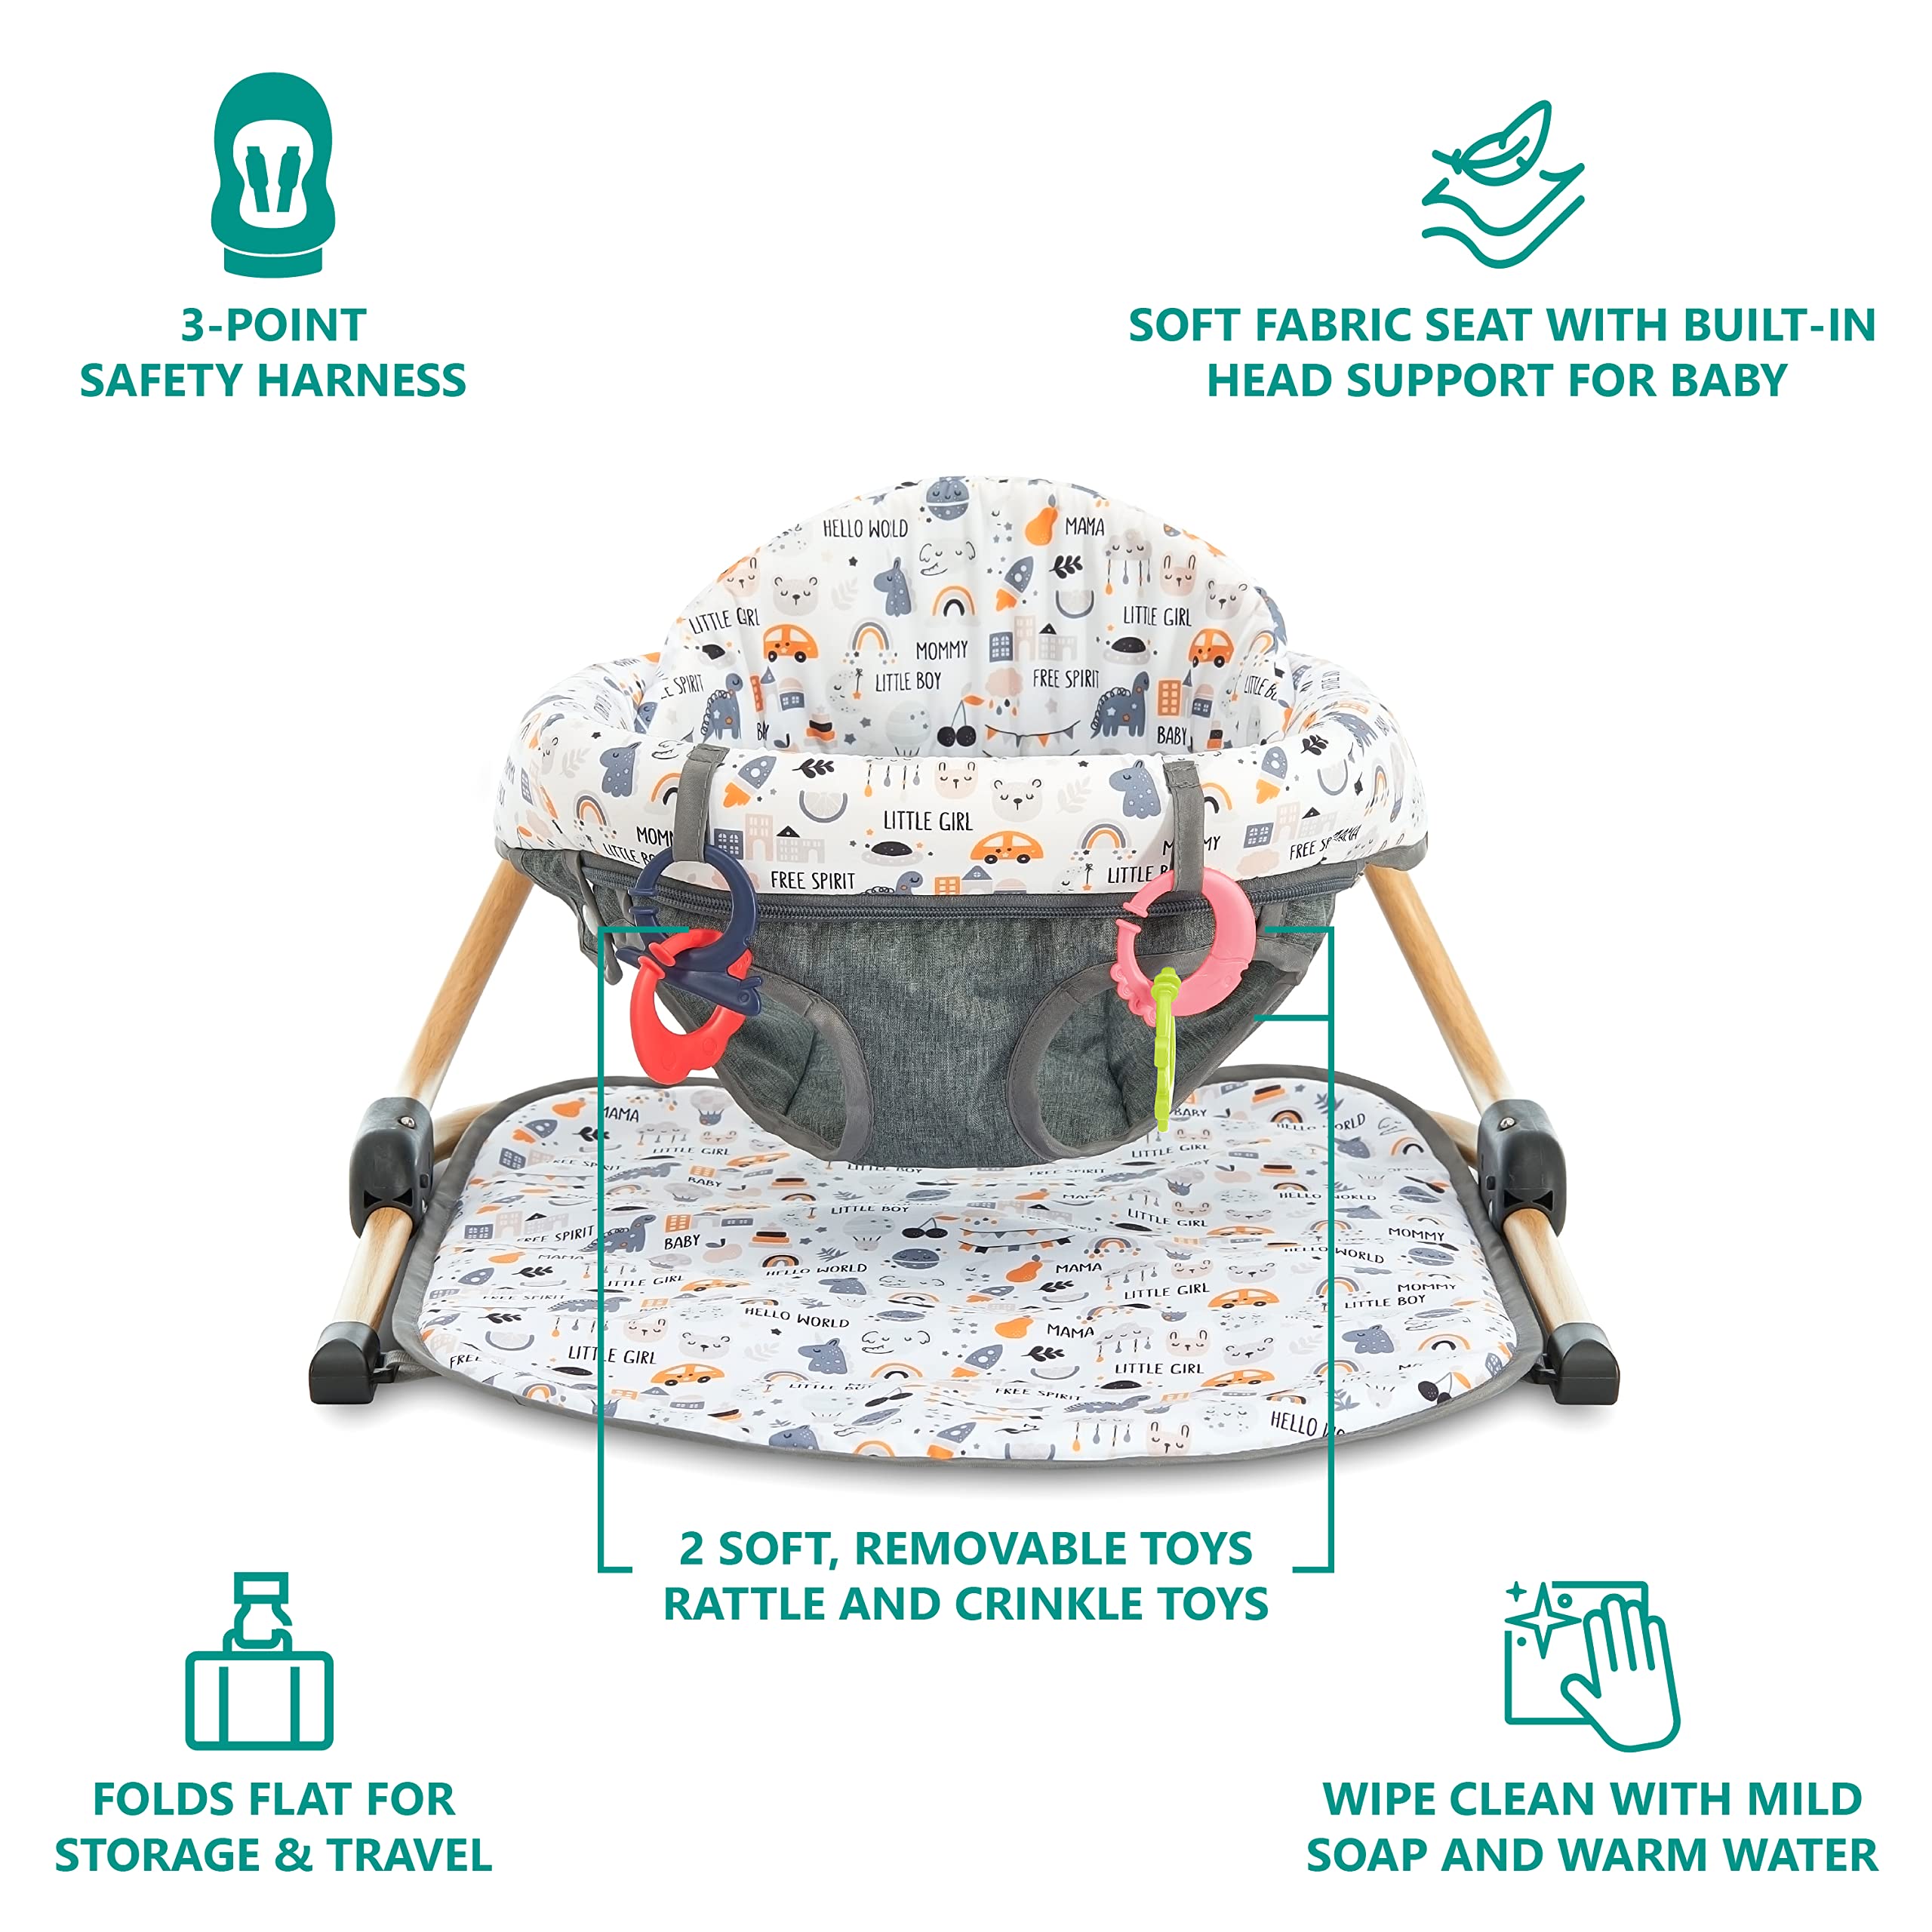 Dream On Me Snug N Play Floor Seat in Hello World, Baby Seat, Top-Notch Safety Features, Padded Baby Floor Seat, Waterproof Fabric, Folds Flat, Easy to Store and Transport